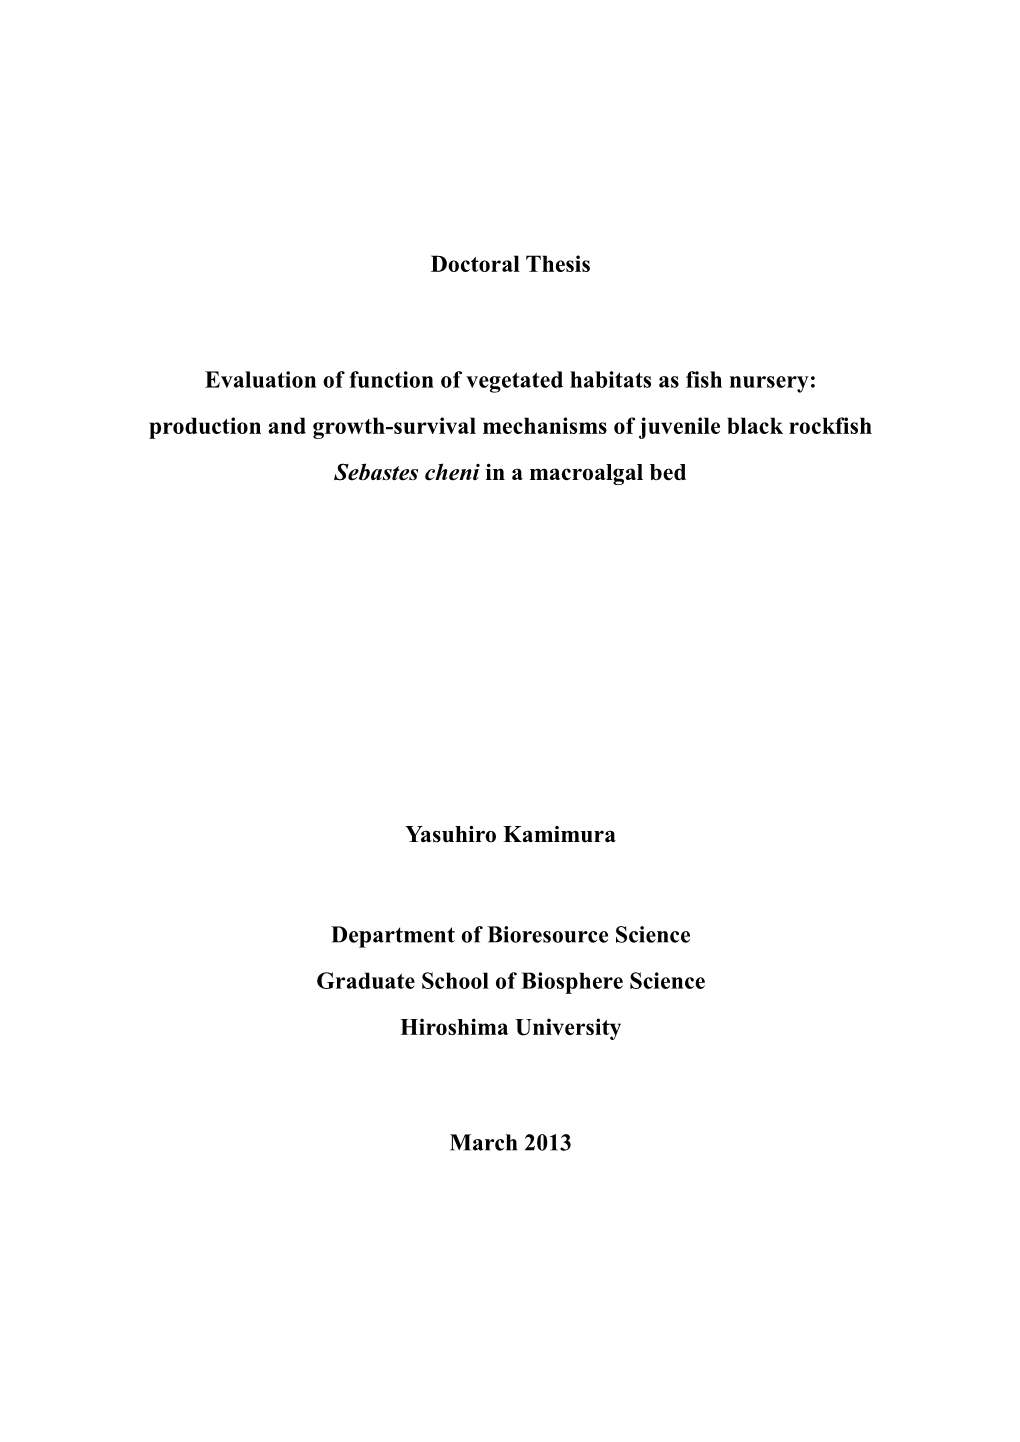 Doctoral Thesis Evaluation of Function of Vegetated Habitats As